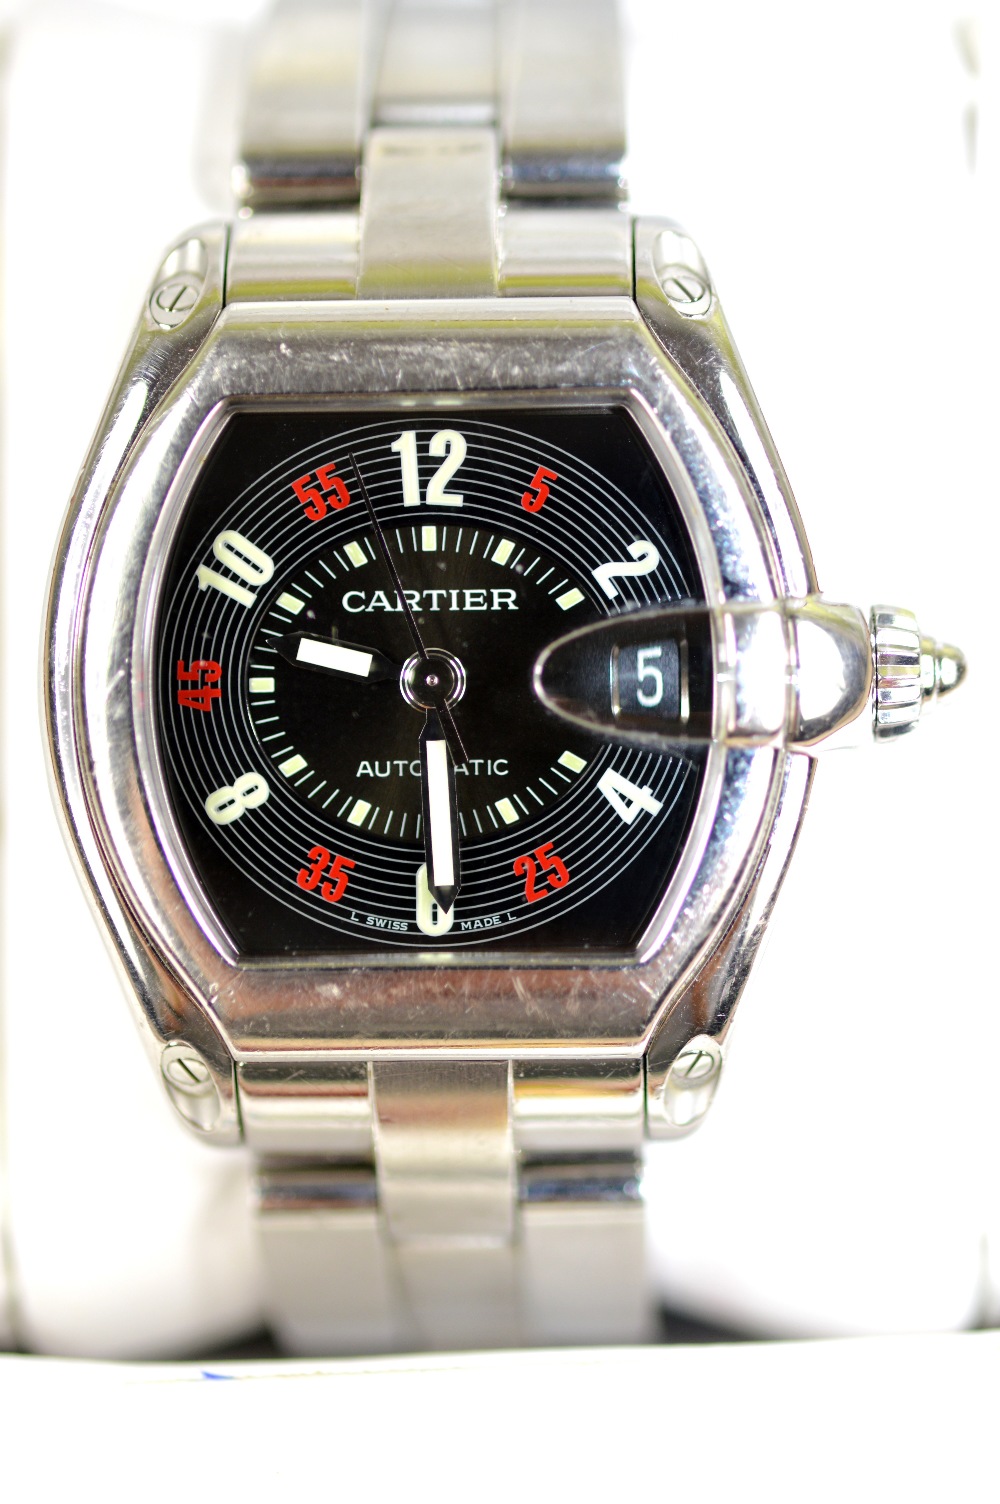 Gentlemans Cartier Roadster watch,boxed,tested RRP £3995 - Image 2 of 6